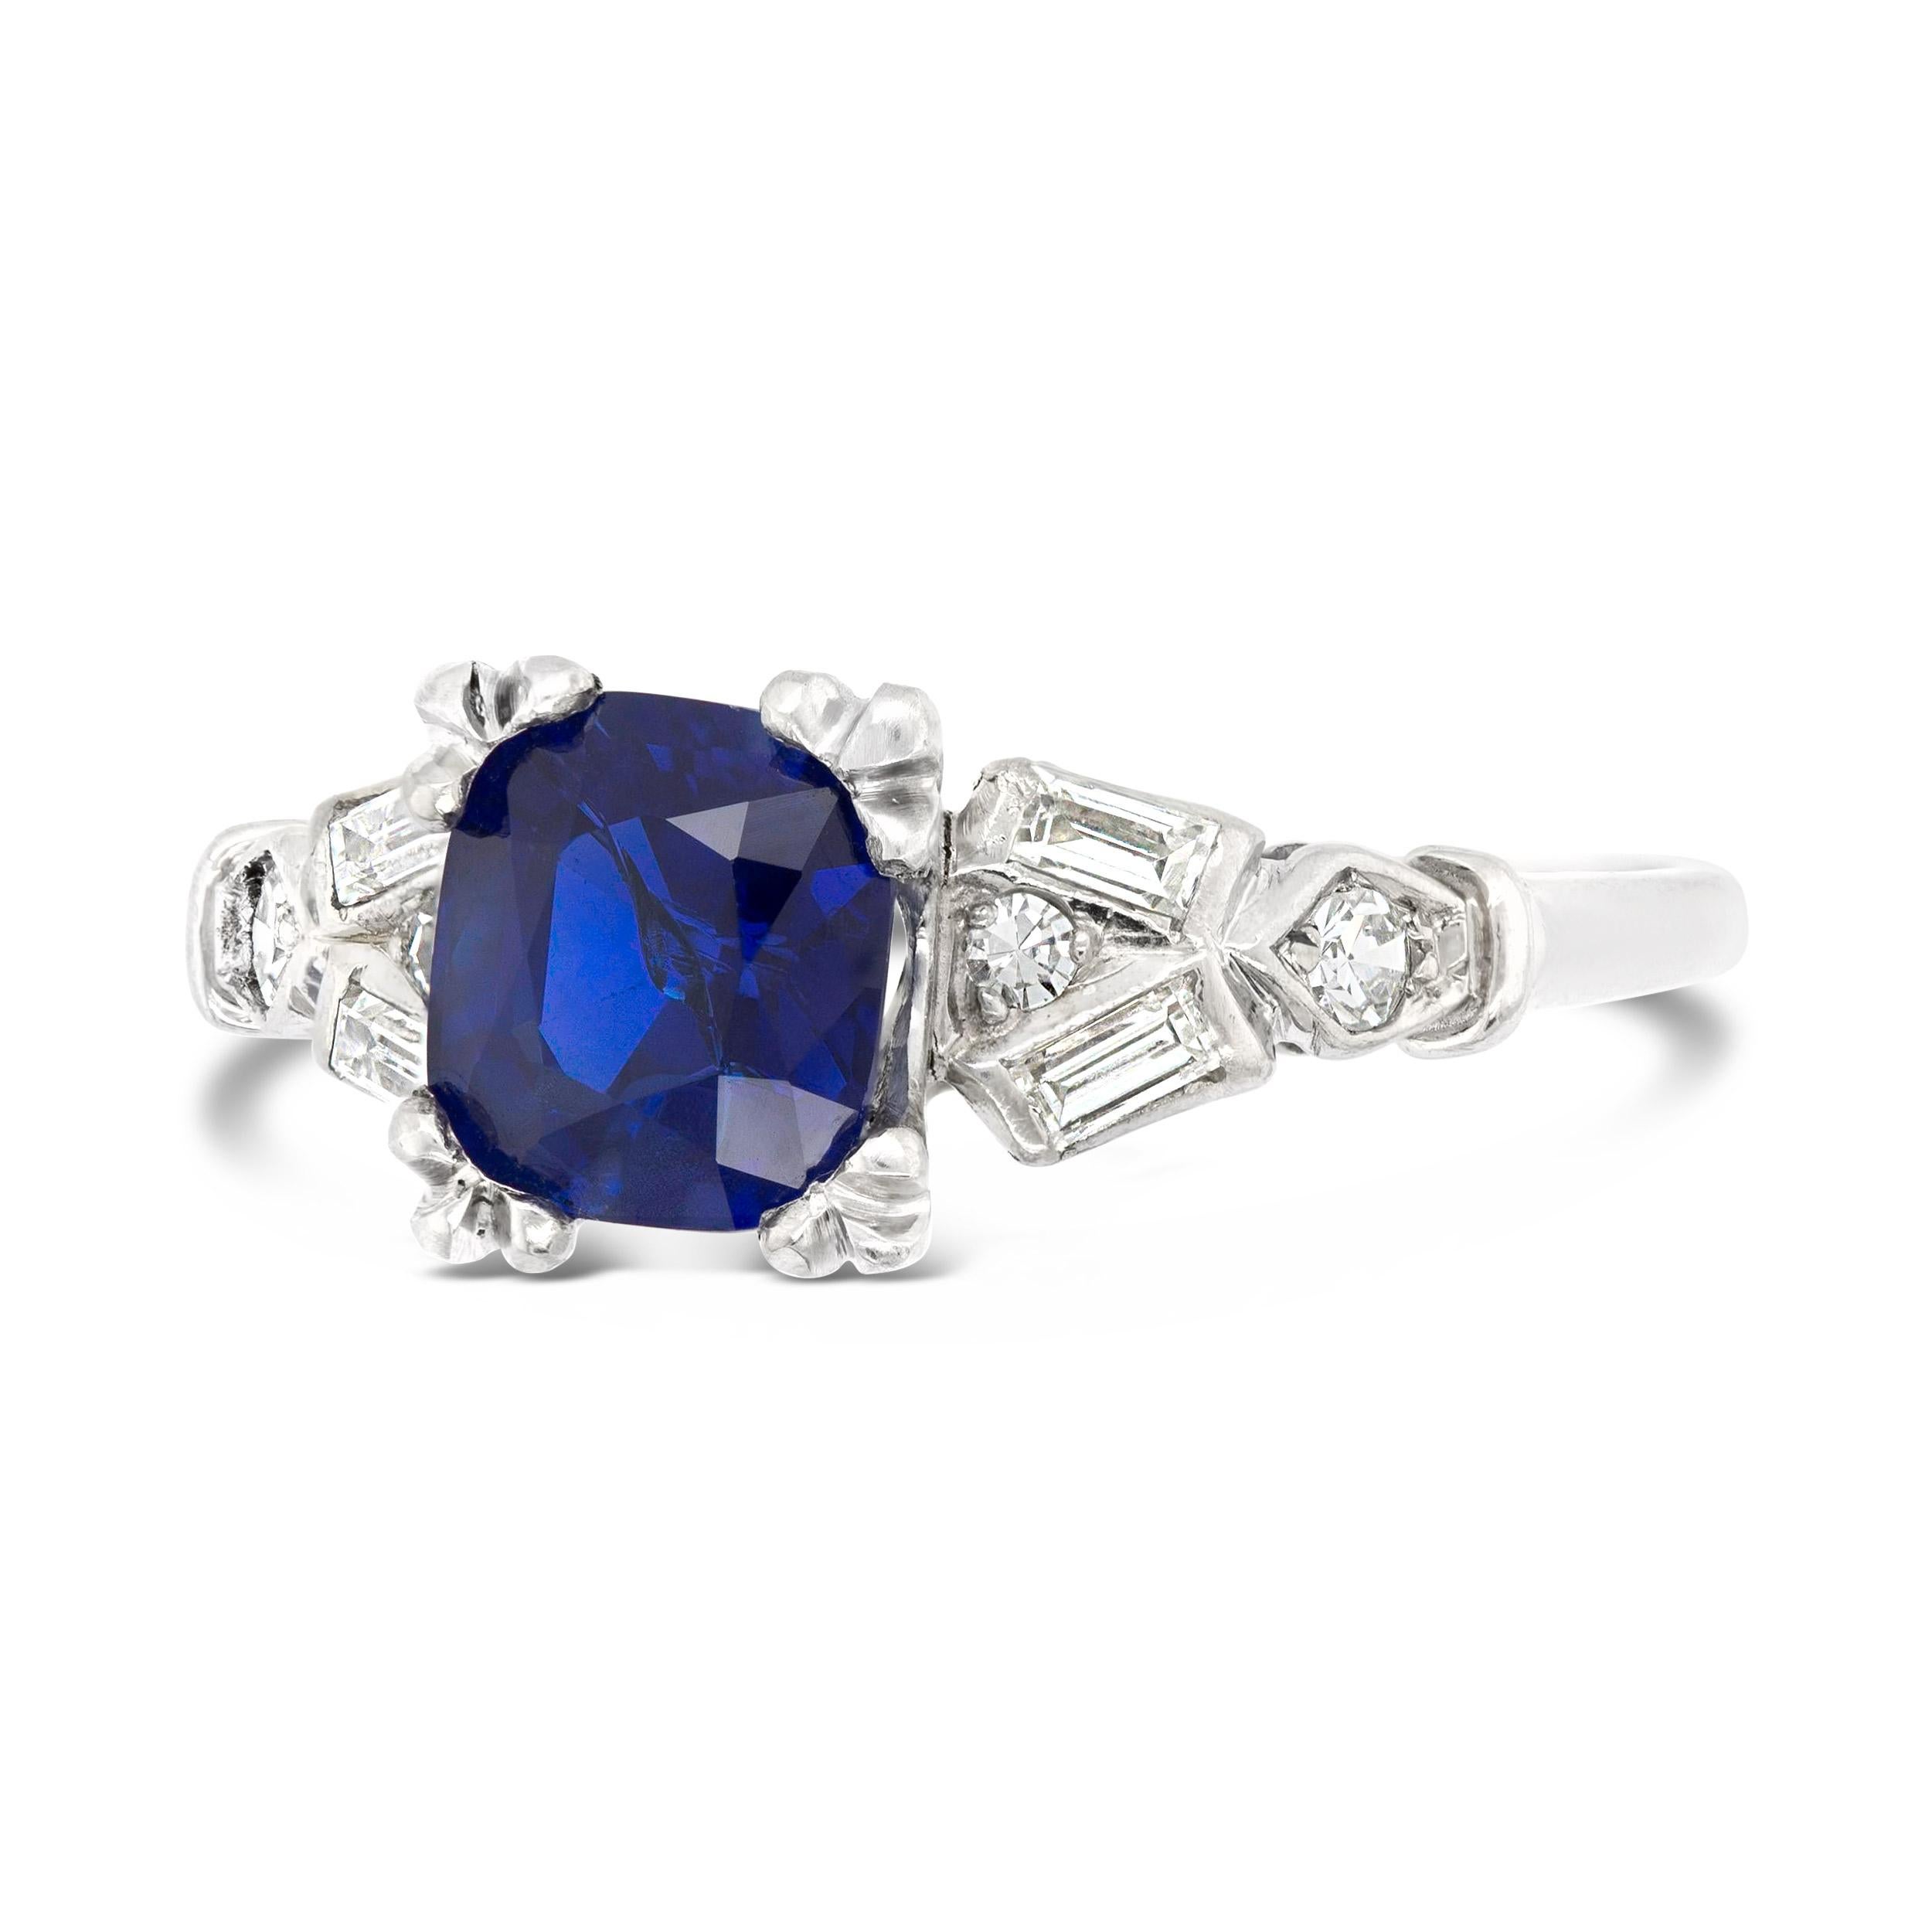 So delicate, so elegant. Kashmir sapphires are some of the most sought after, for their rarity and quality. An incredibly beautiful deep blue cushion cut sapphire from the Kashmir region (graded by AGL) sits in this original Art Deco setting. It